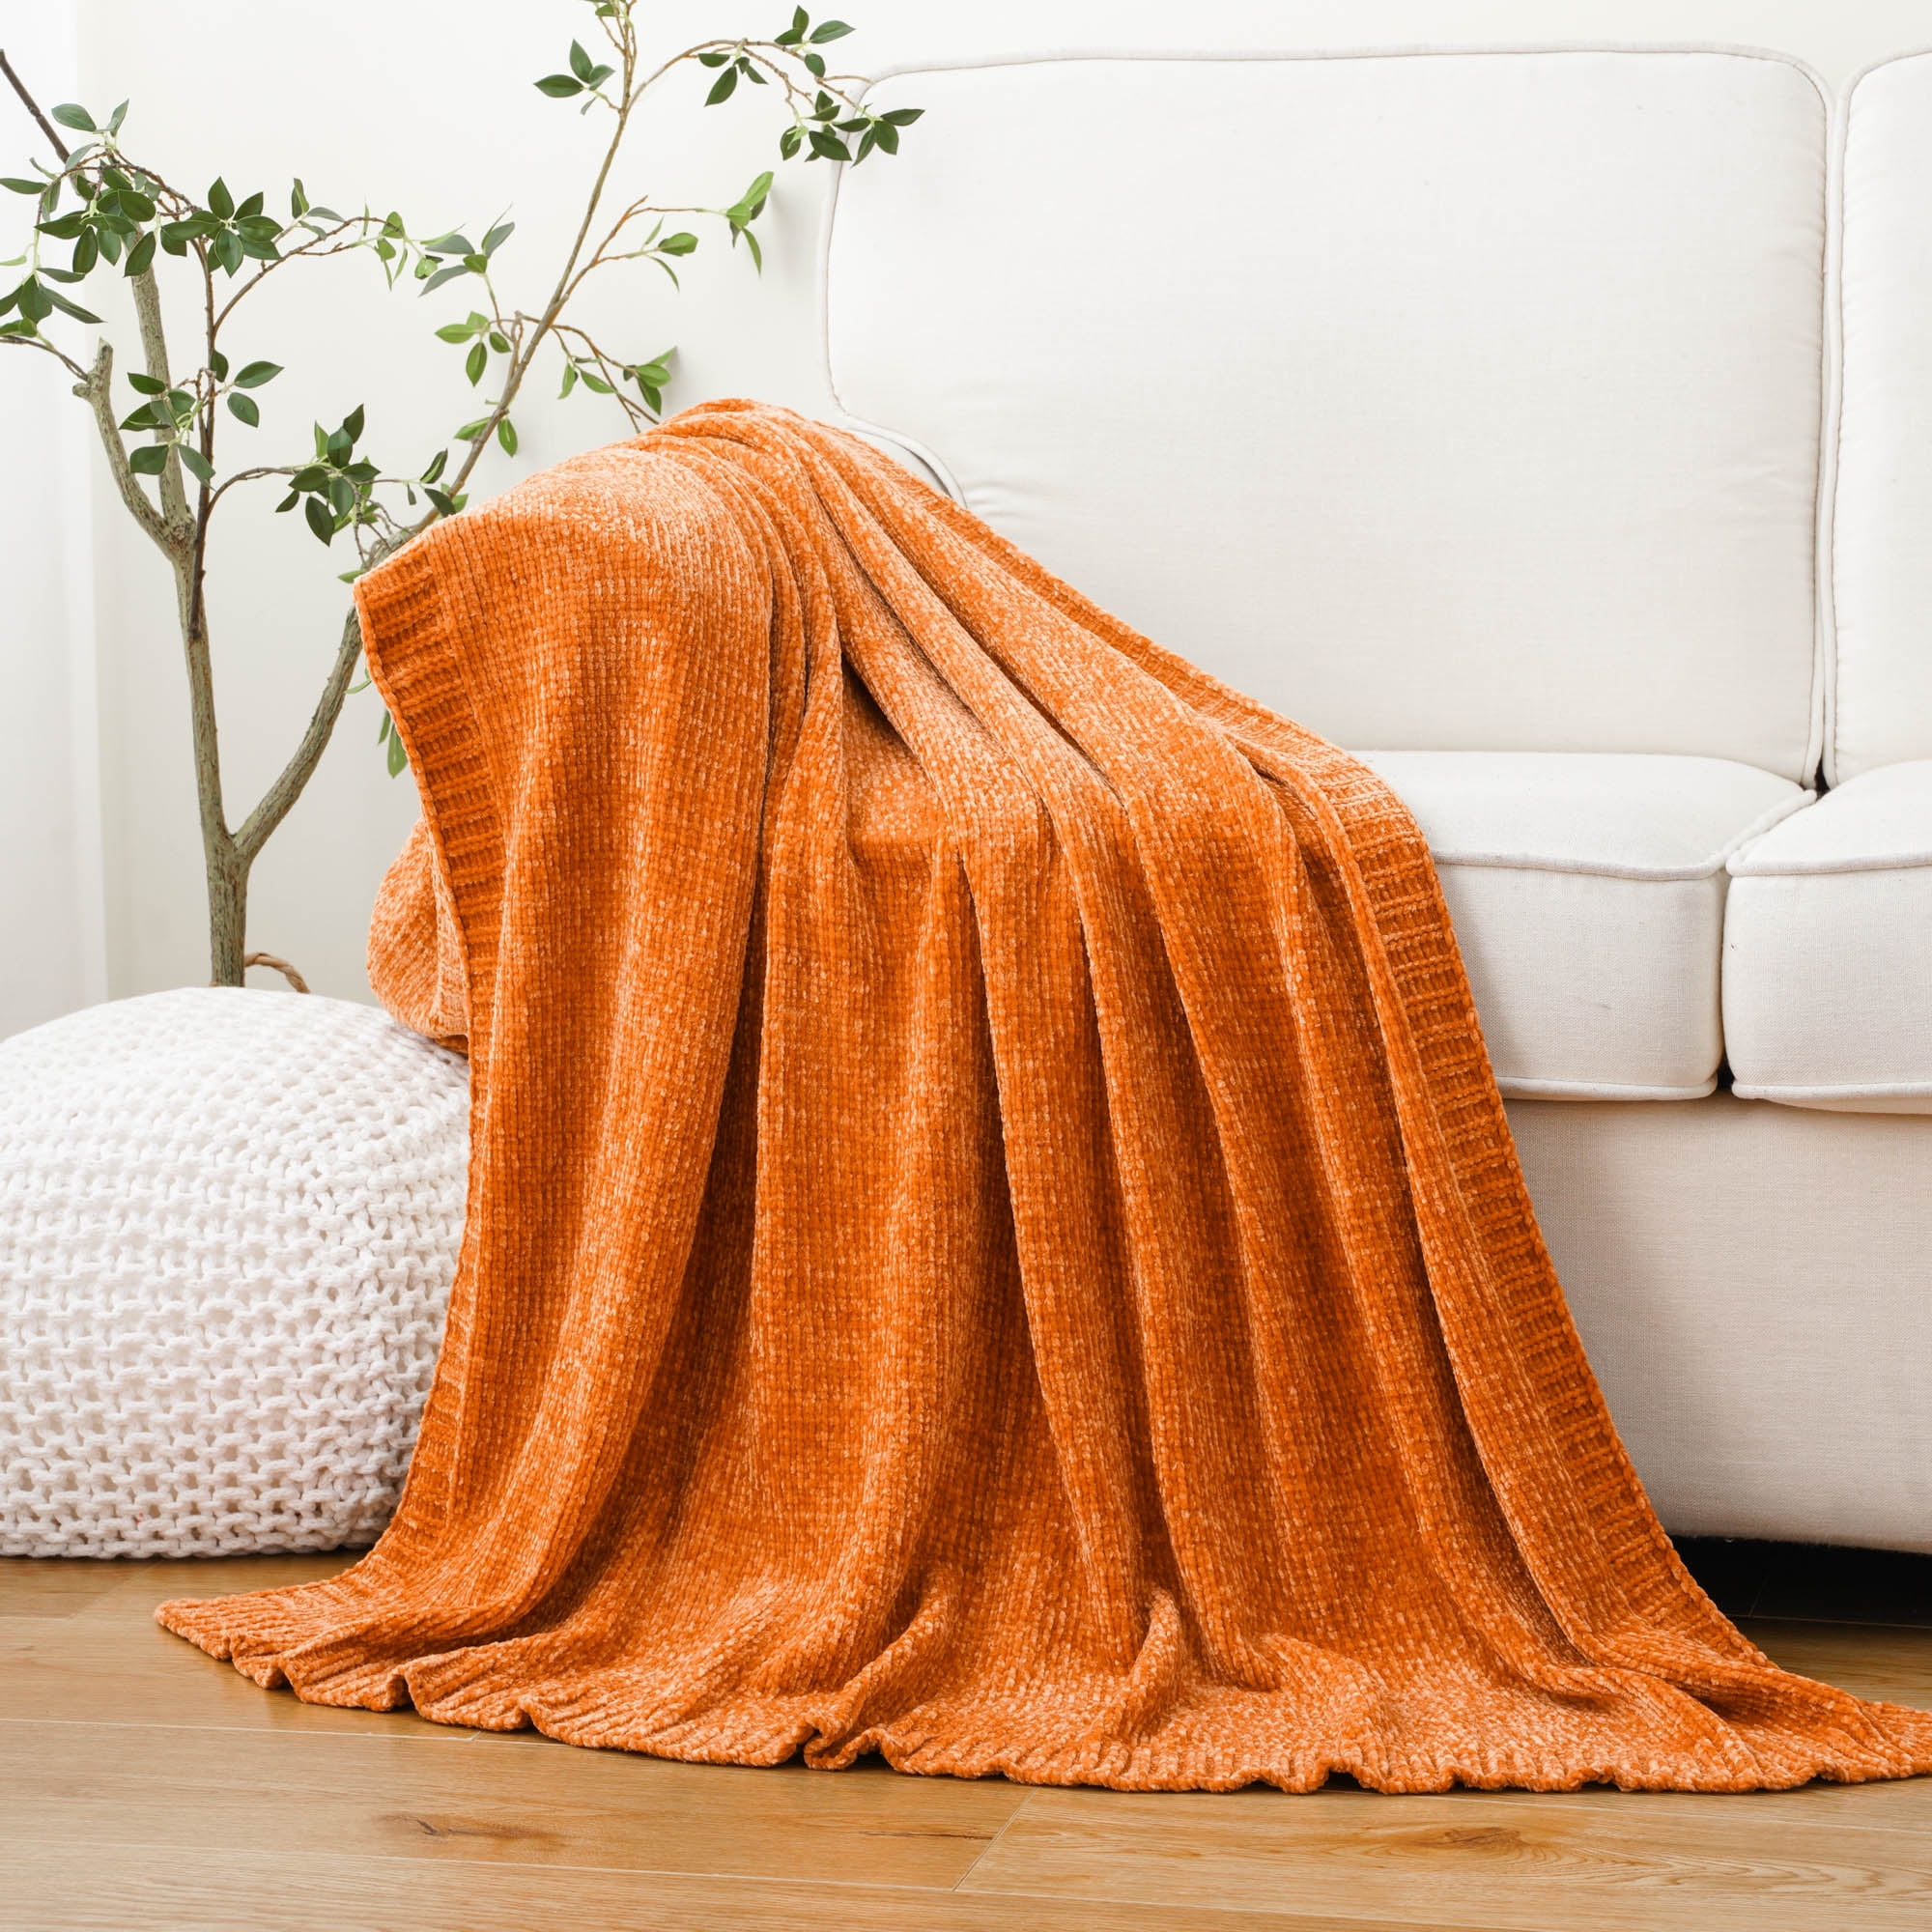 Battilo Orange Throw Blanket Chenille Knit Throws for Couch Bed, Super ...